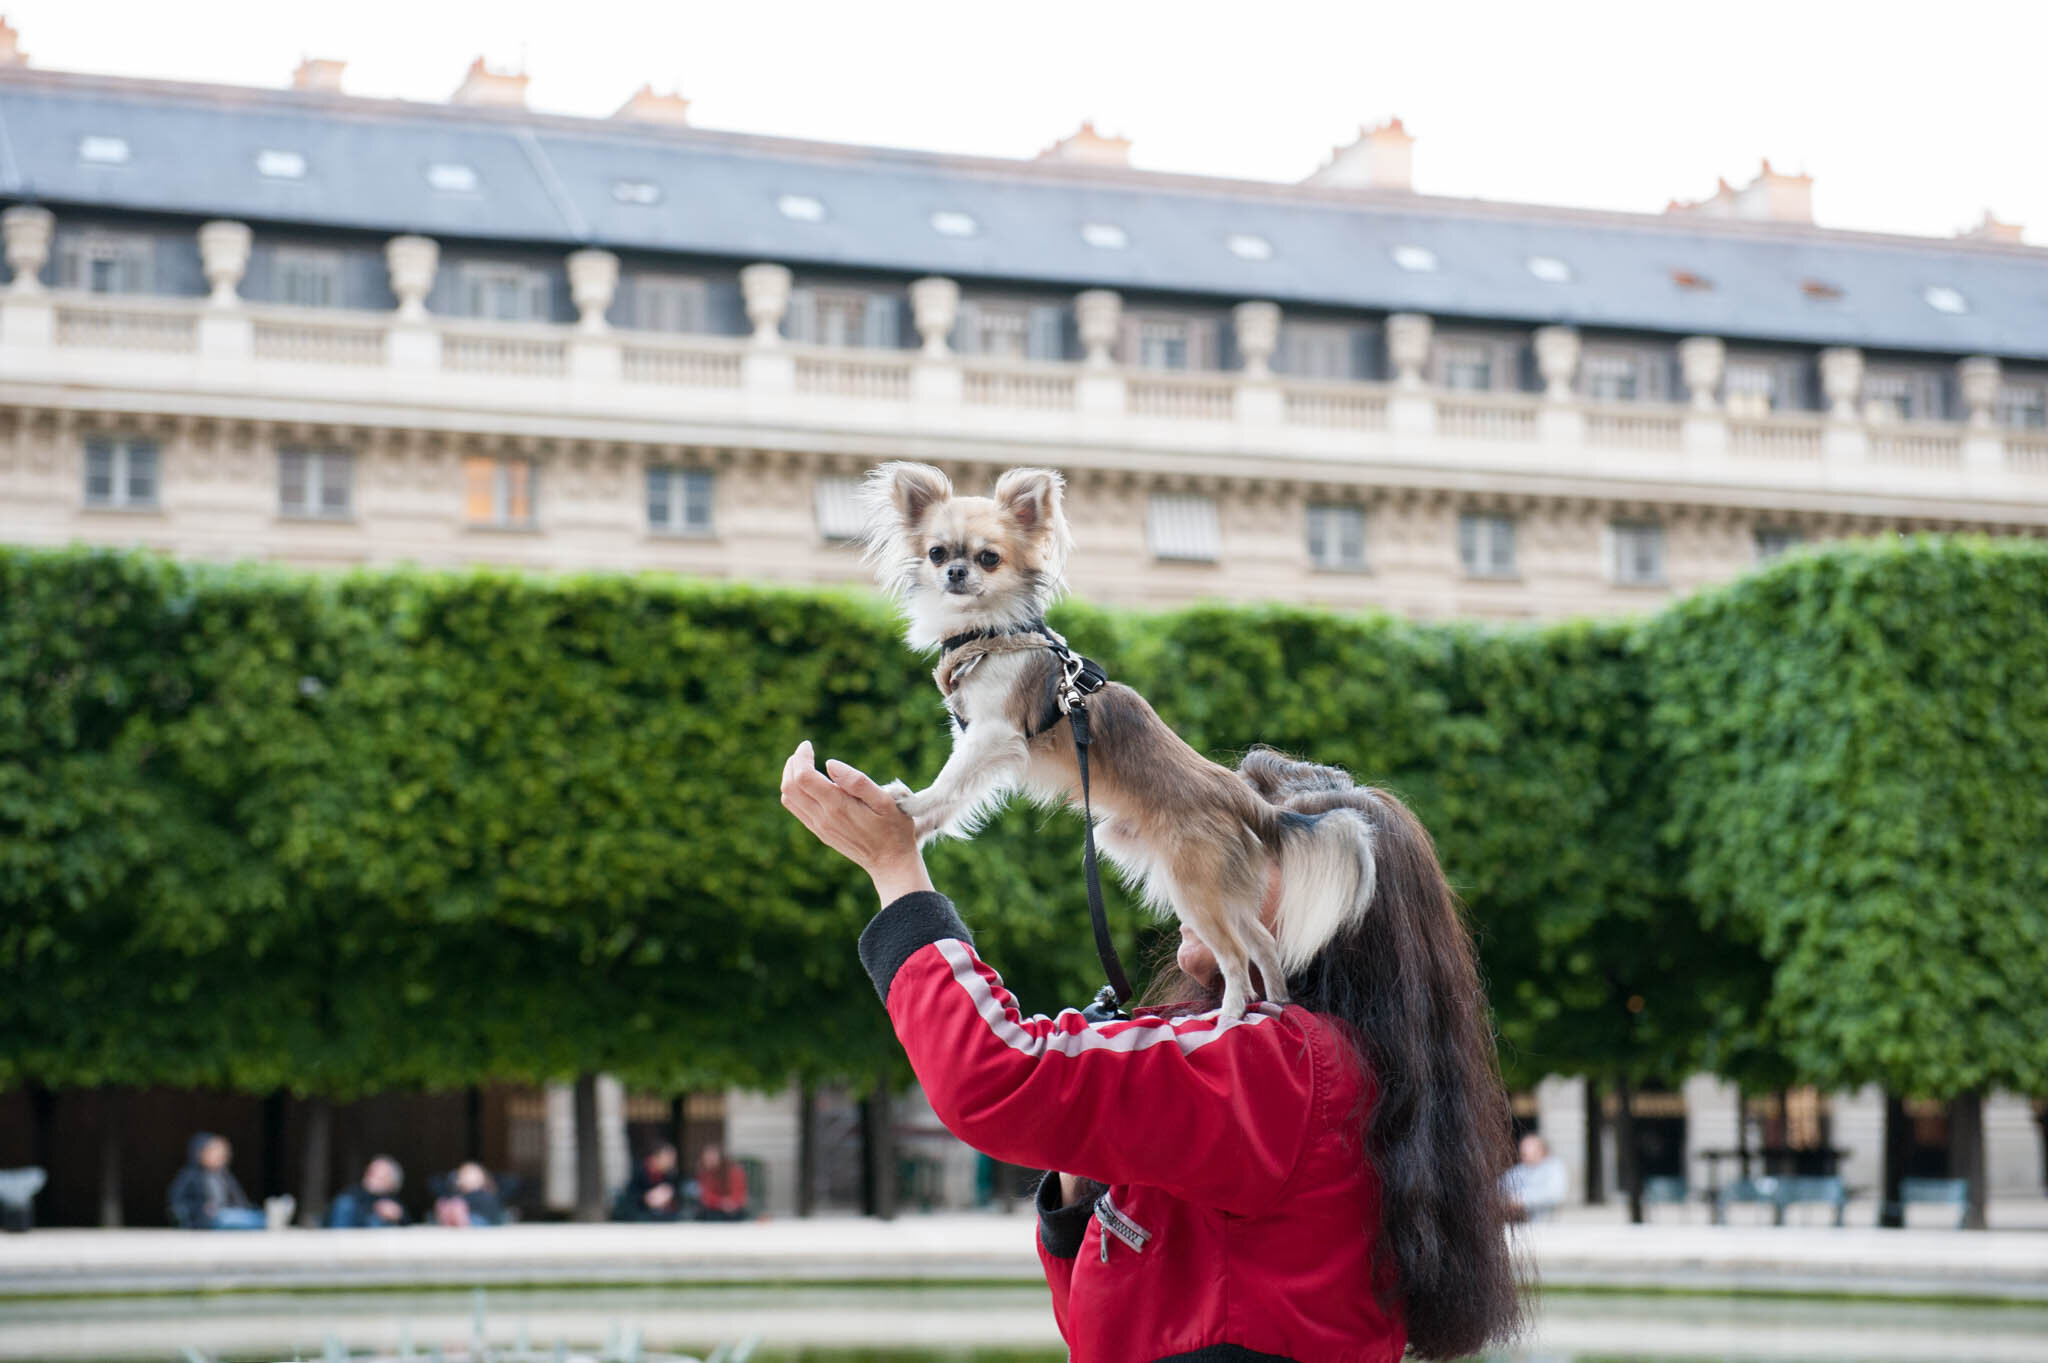    ‘Paris/NYC’ Book ‘Edition Lammerhuber’    Lady holding her dog, Palais Royal 